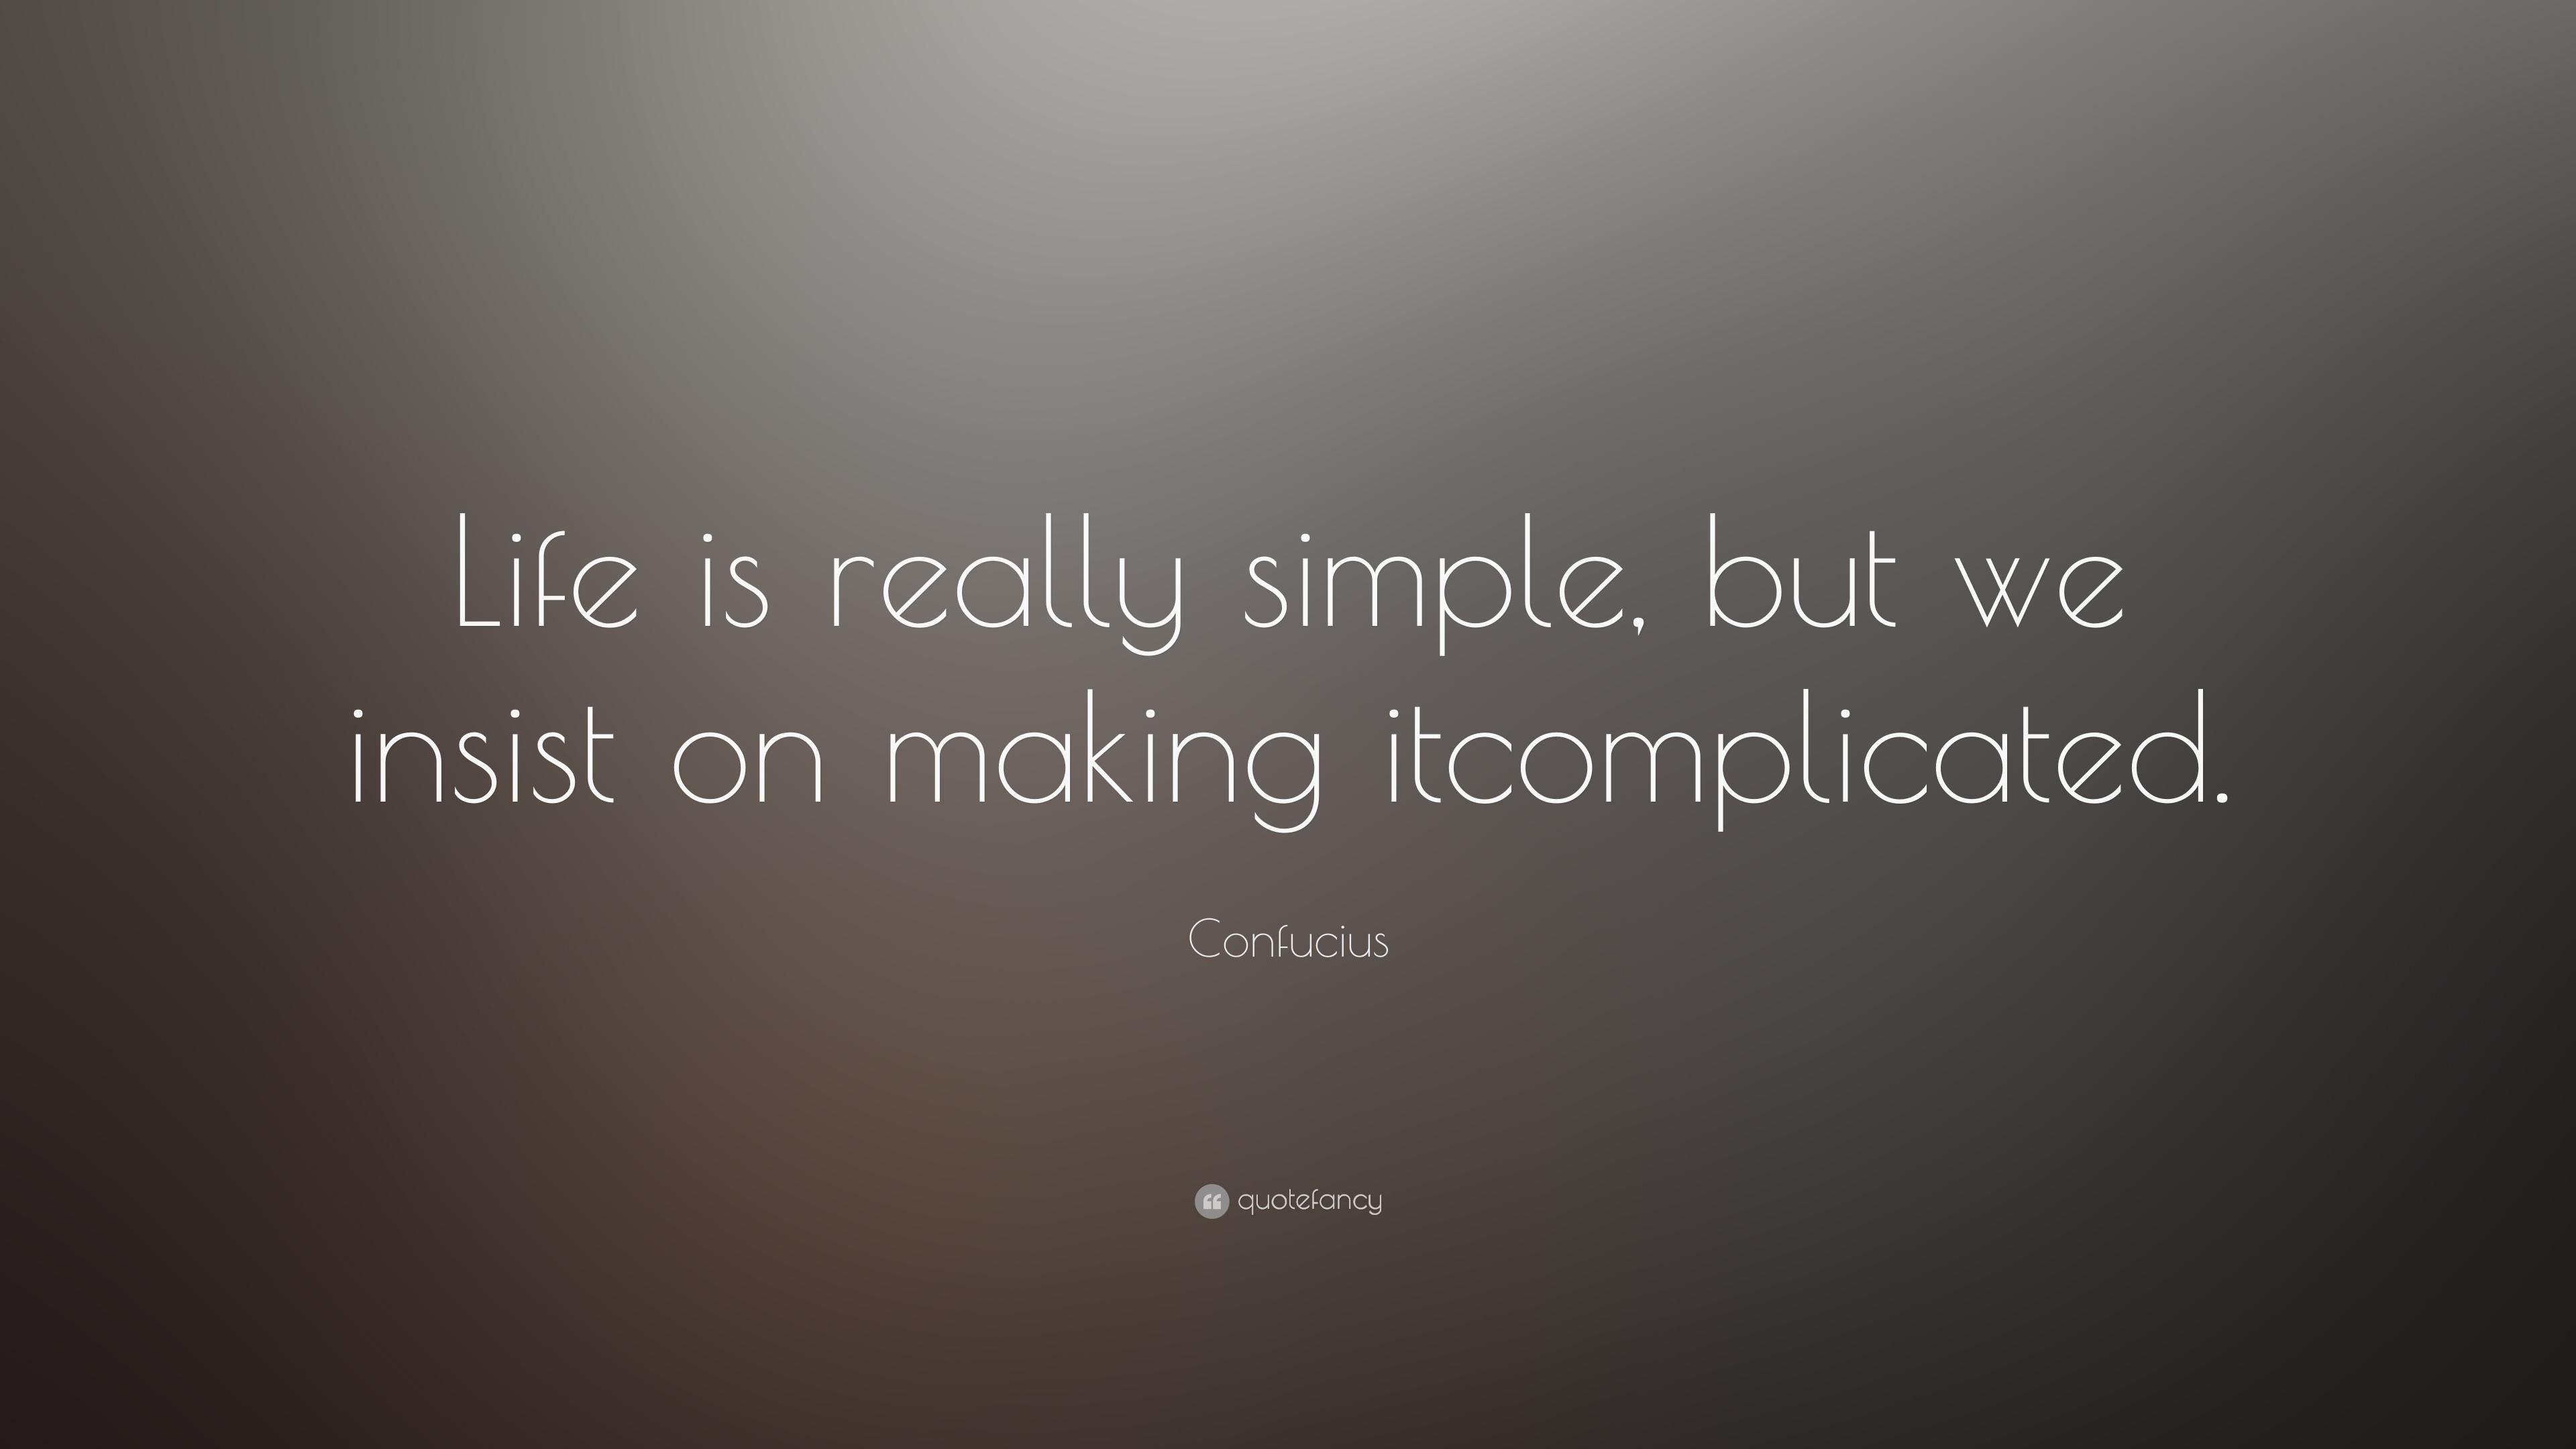 Confucius Quote: “Life is really simple, but we insist